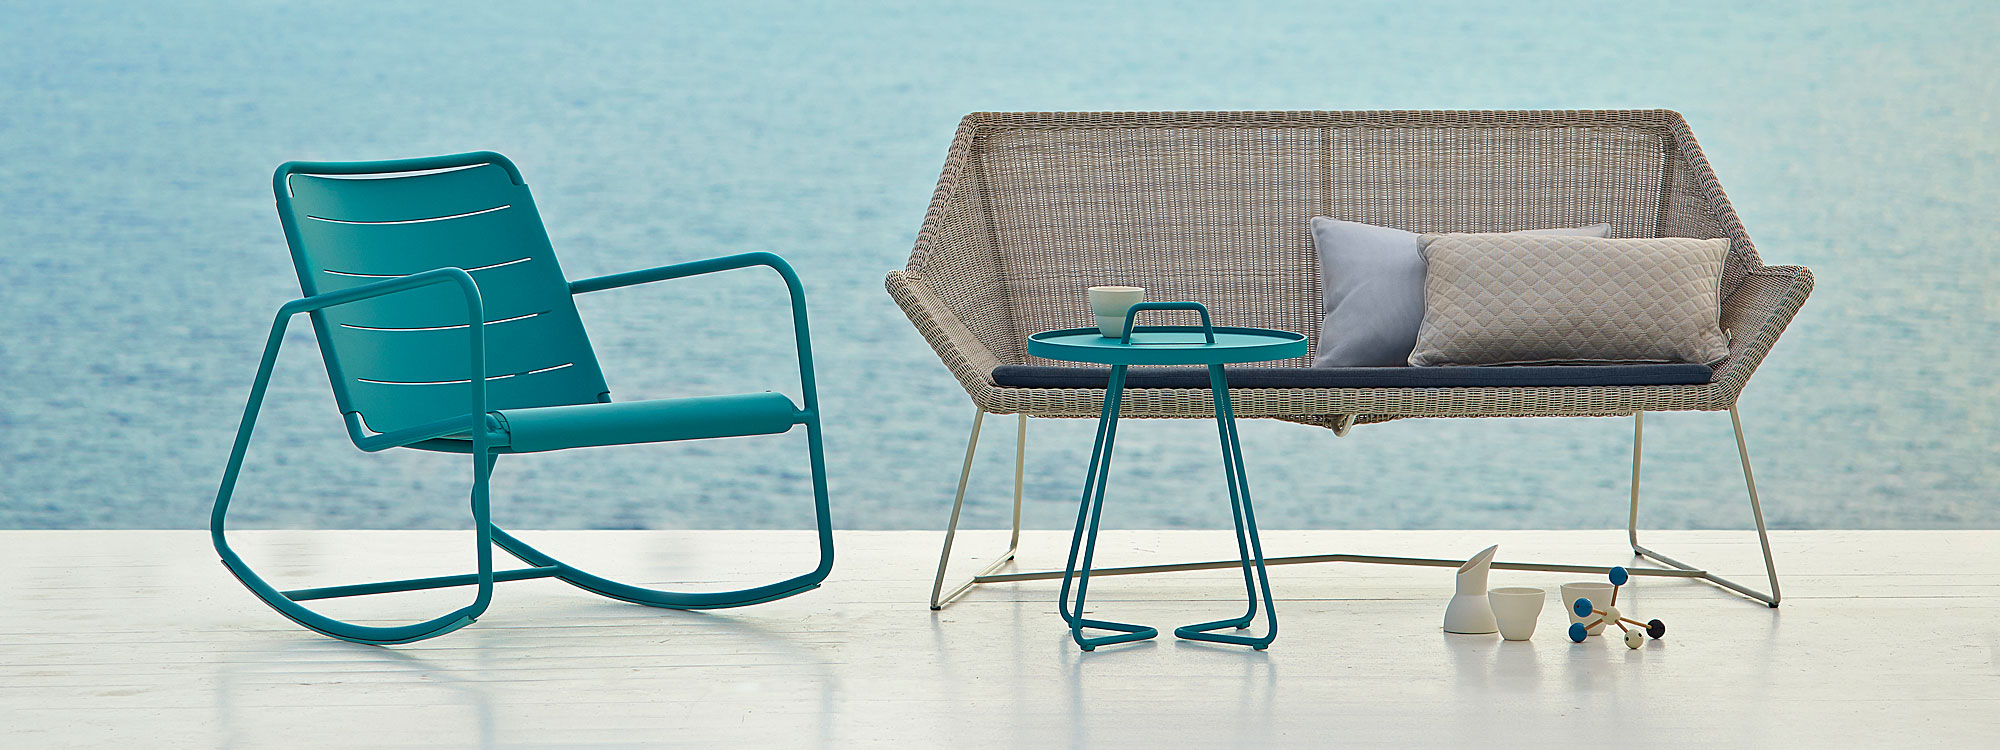 Image of grey Breeze sofa and aqua On The Move tray table by Cane-line garden furniture